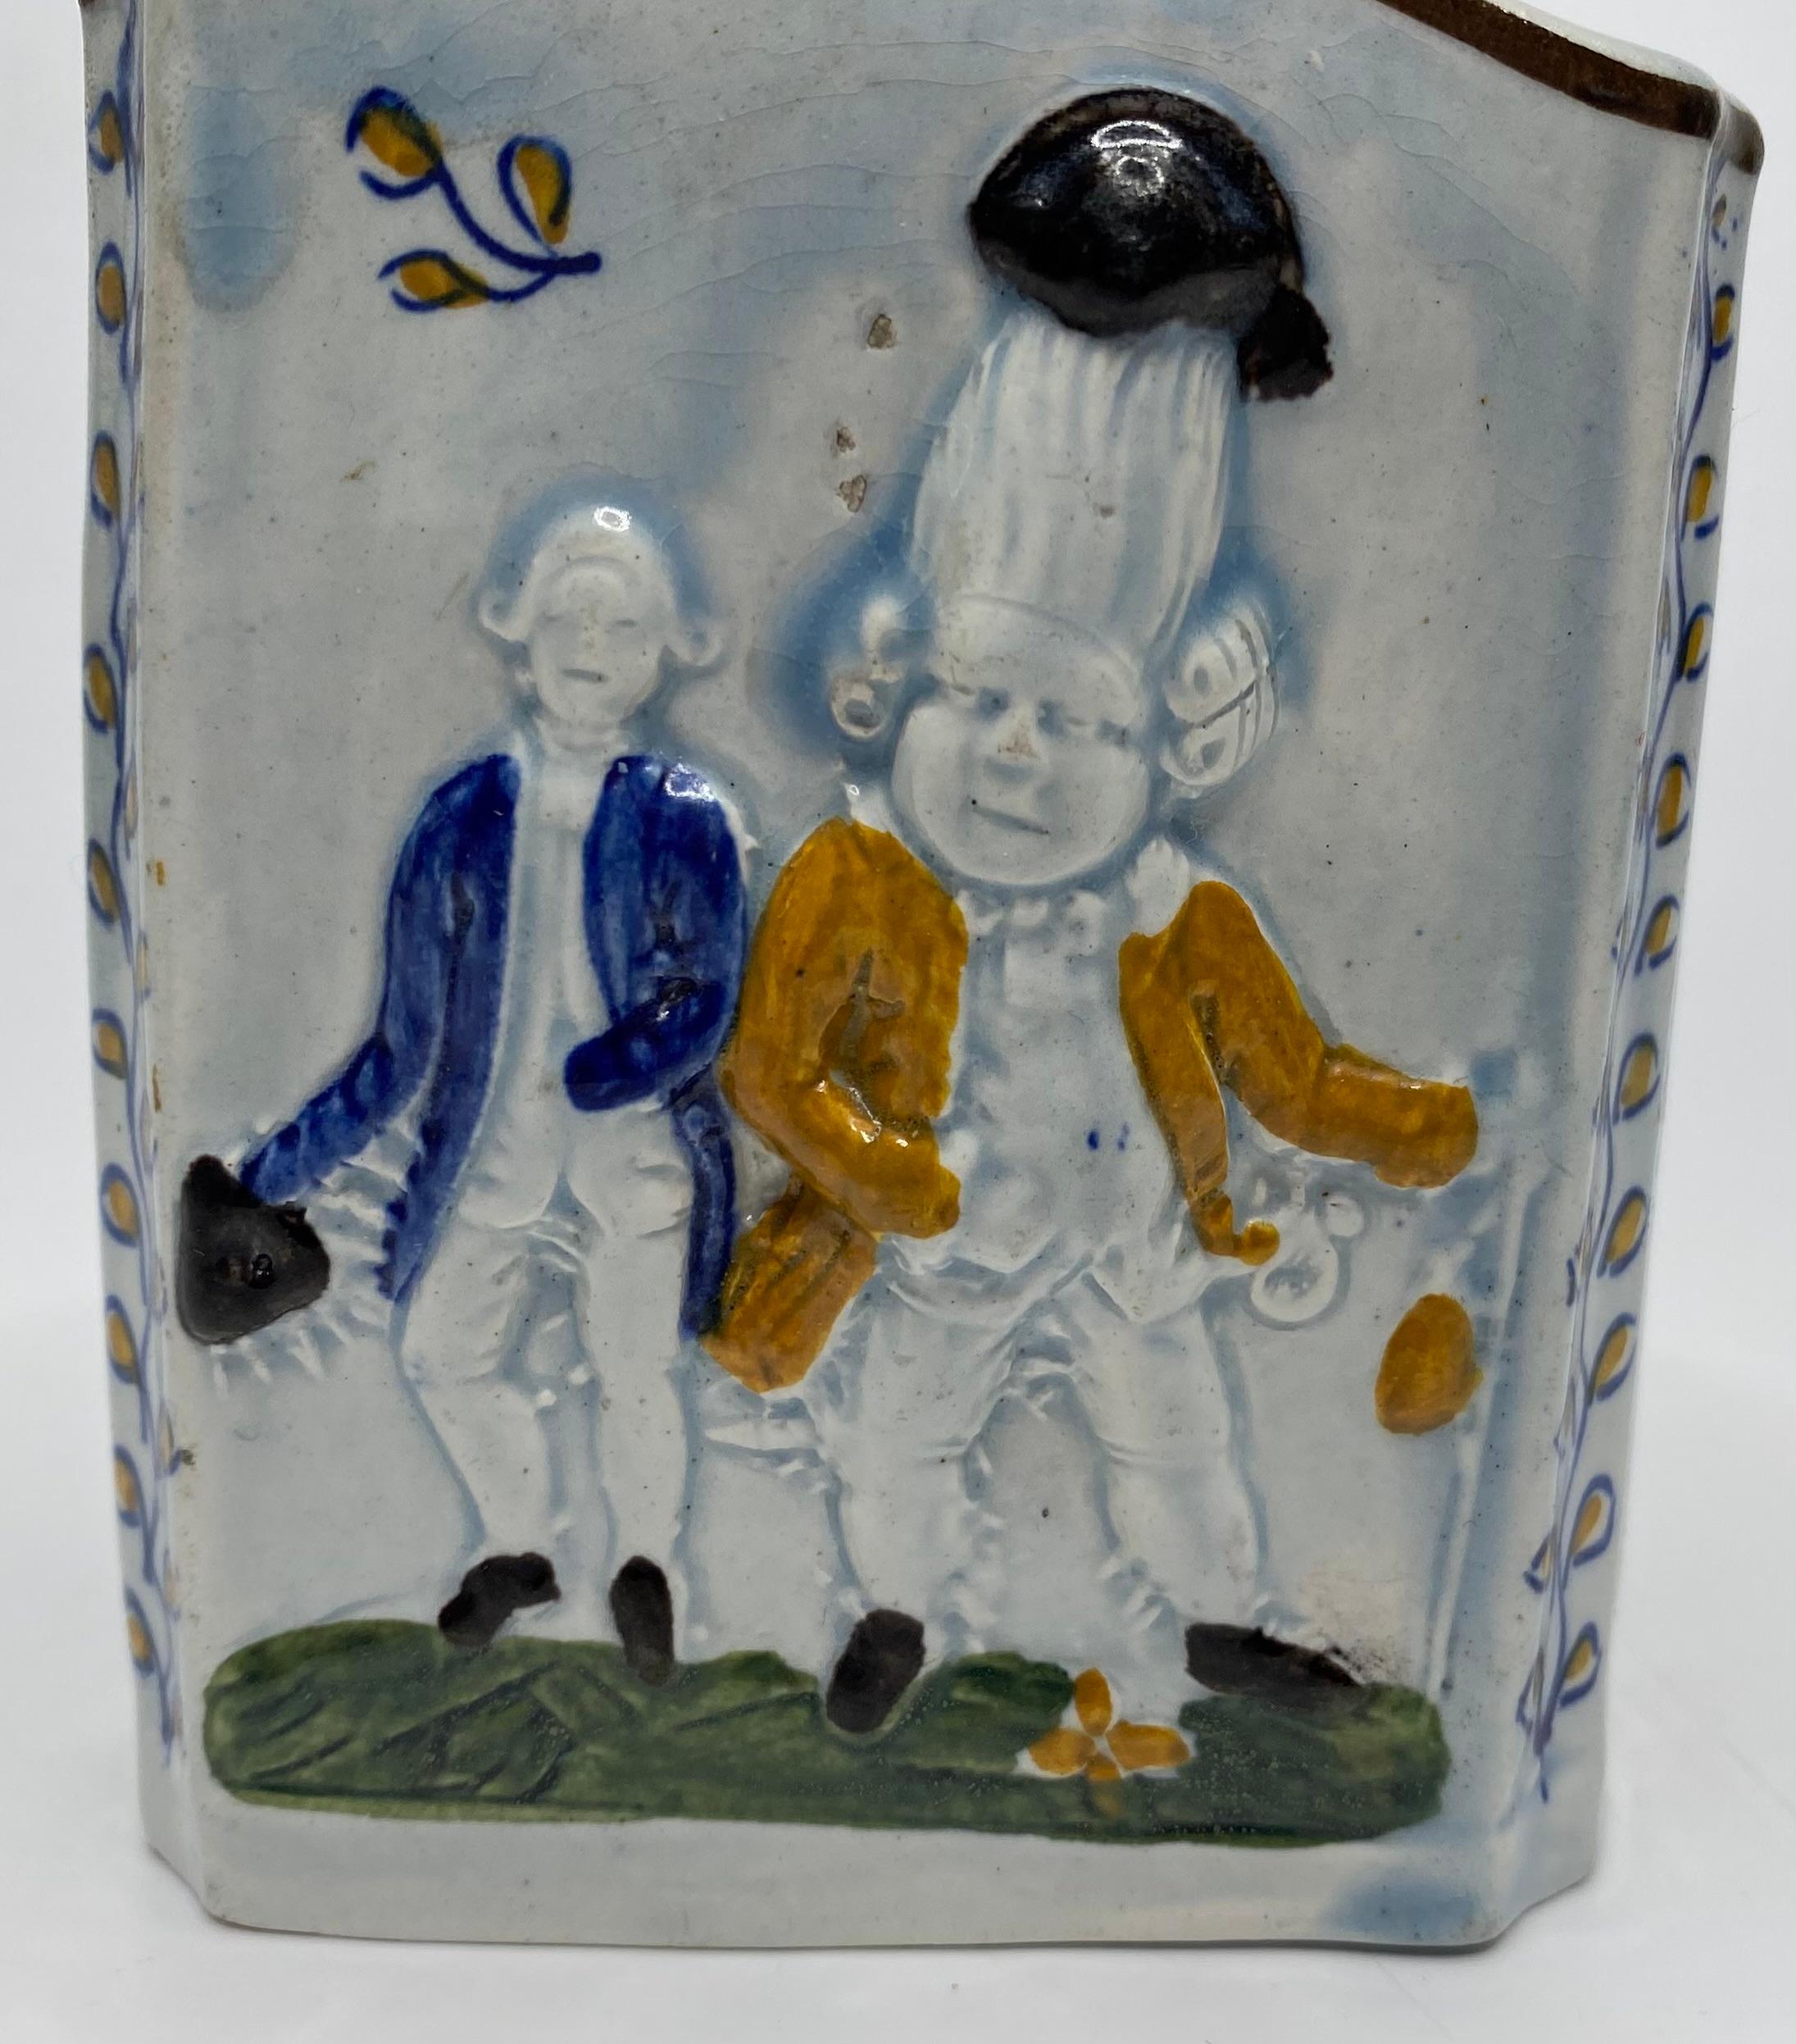 Fired Prattware pottery ‘Macaroni’ tea caddy and cover, c. 1800.